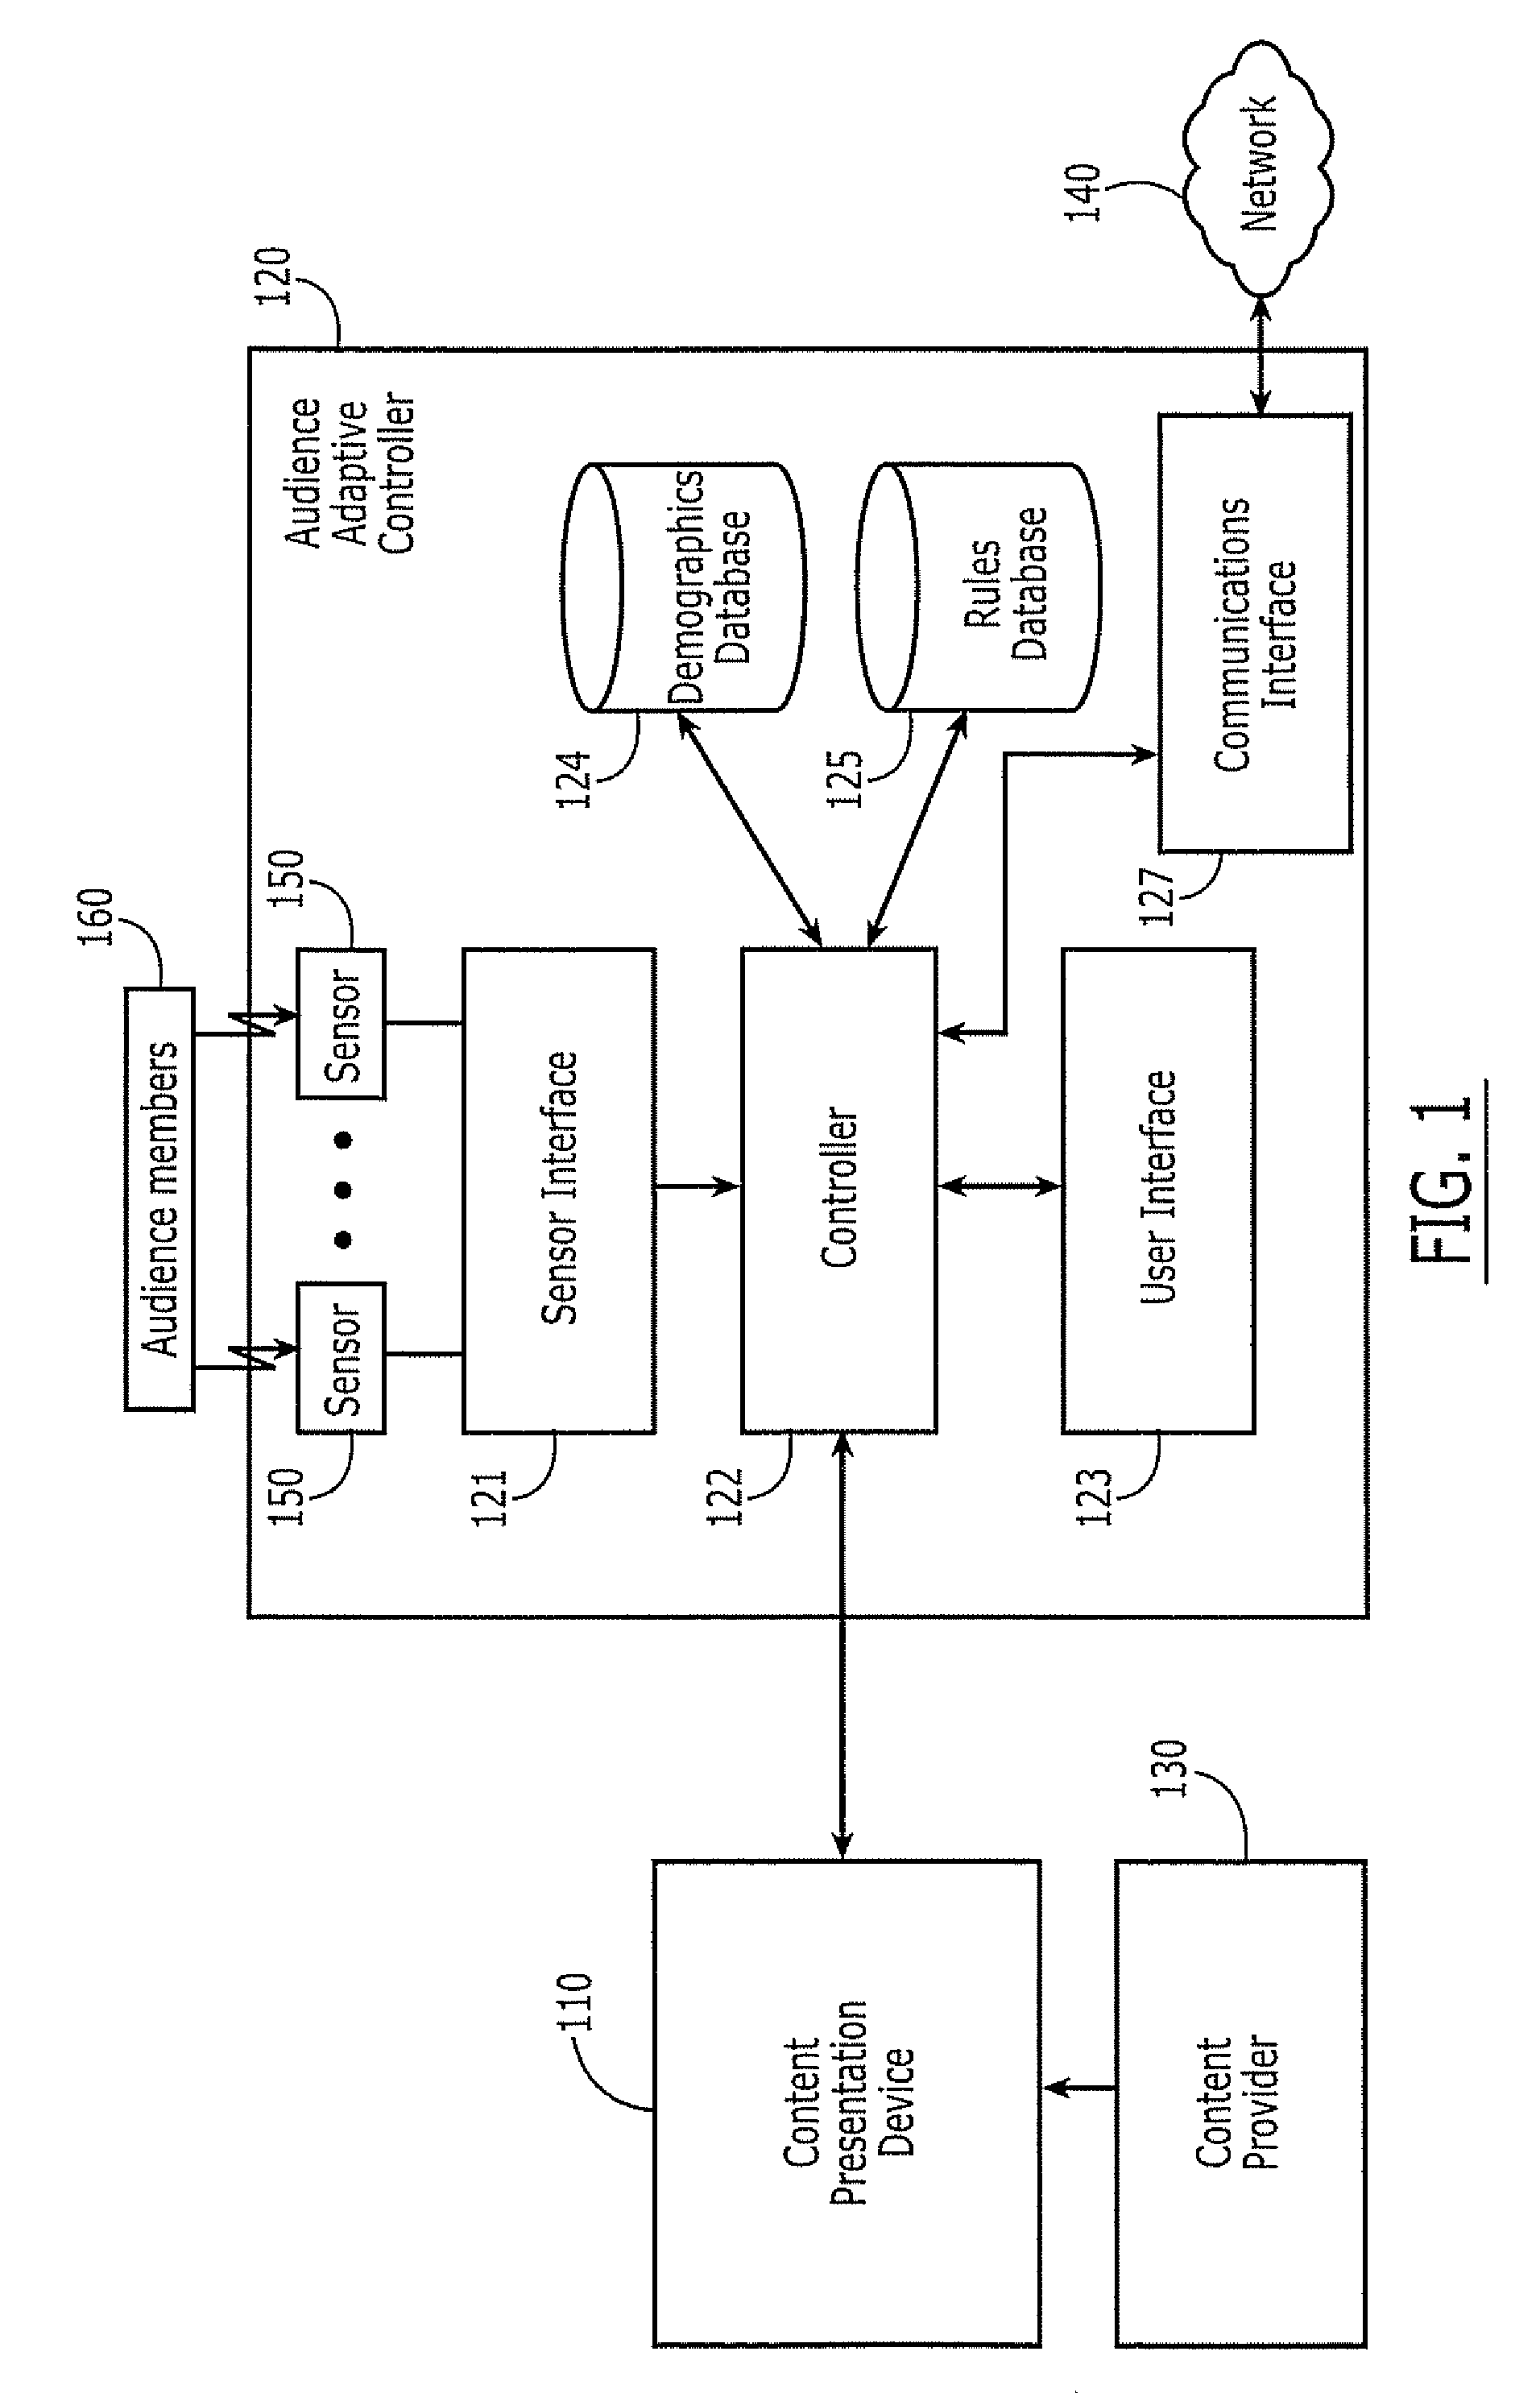 Methods, Apparatus and Computer Program Products for Audience-Adaptive Control of Content Presentation Based on Sensed Audience Attentiveness